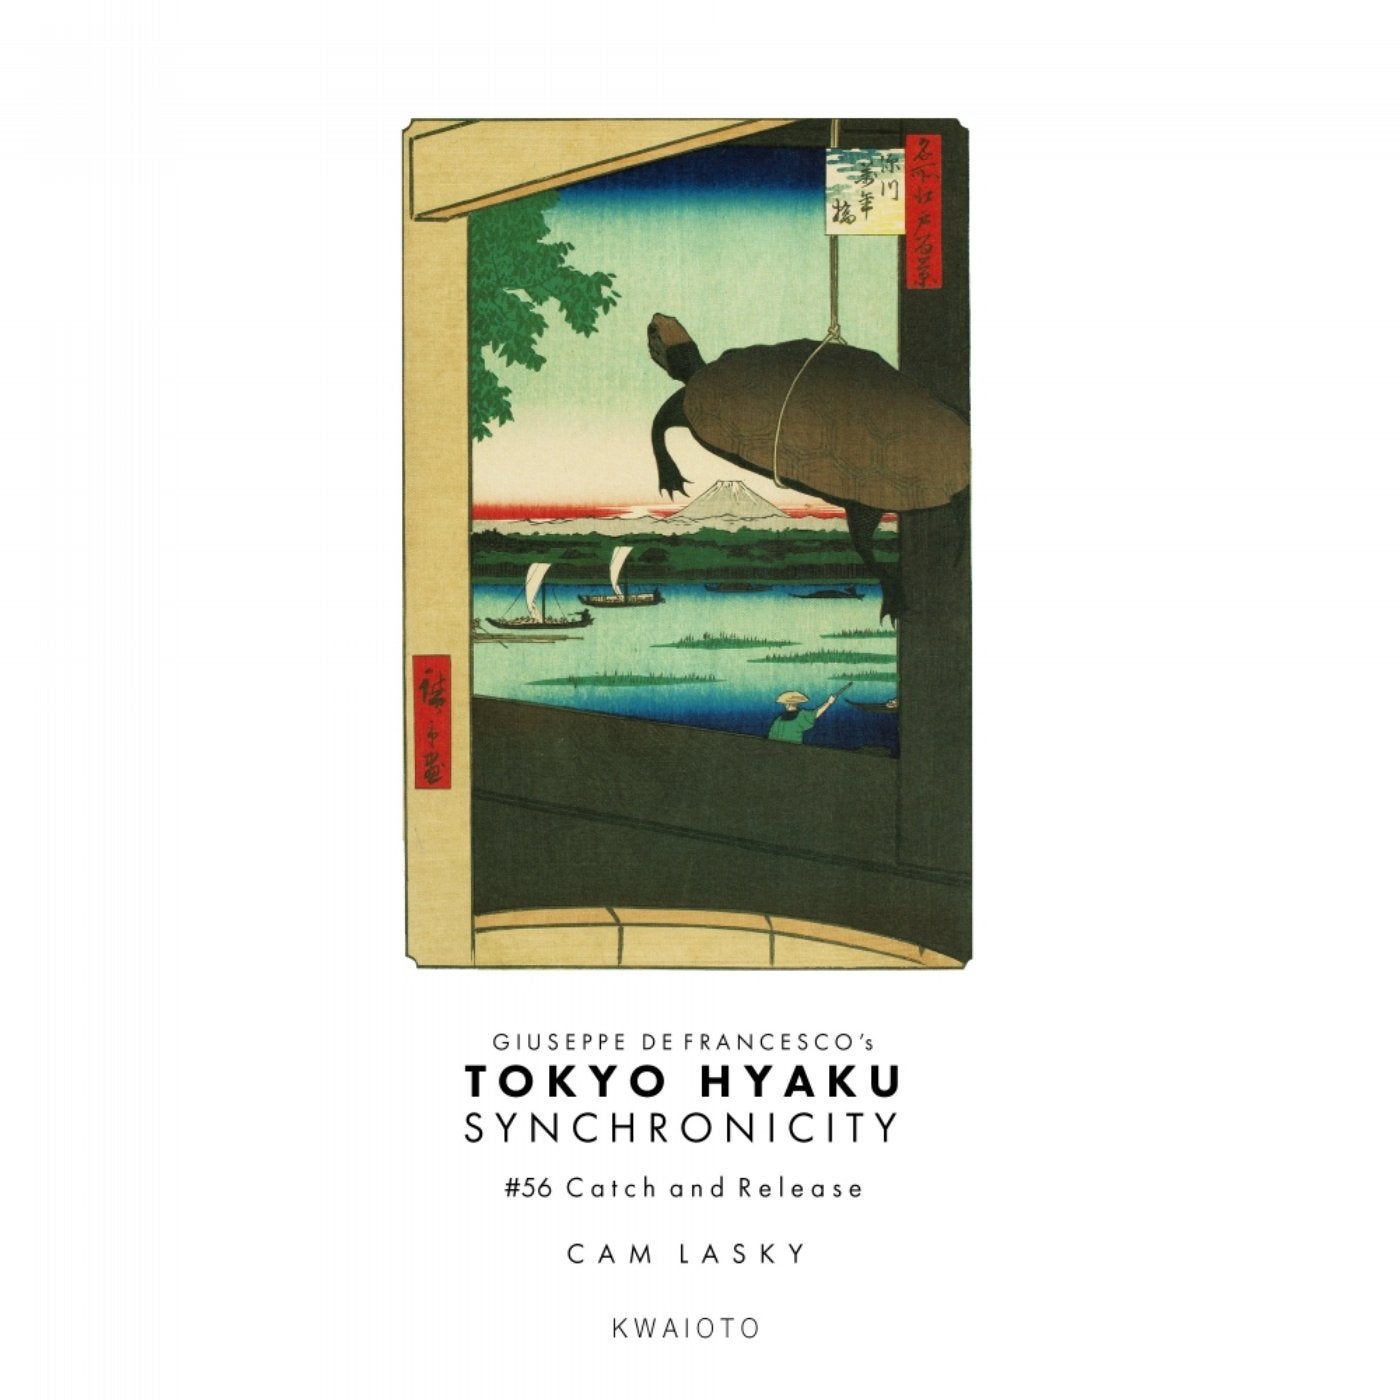 Tokyo Hyaku Synchronicity #56 Catch and Release